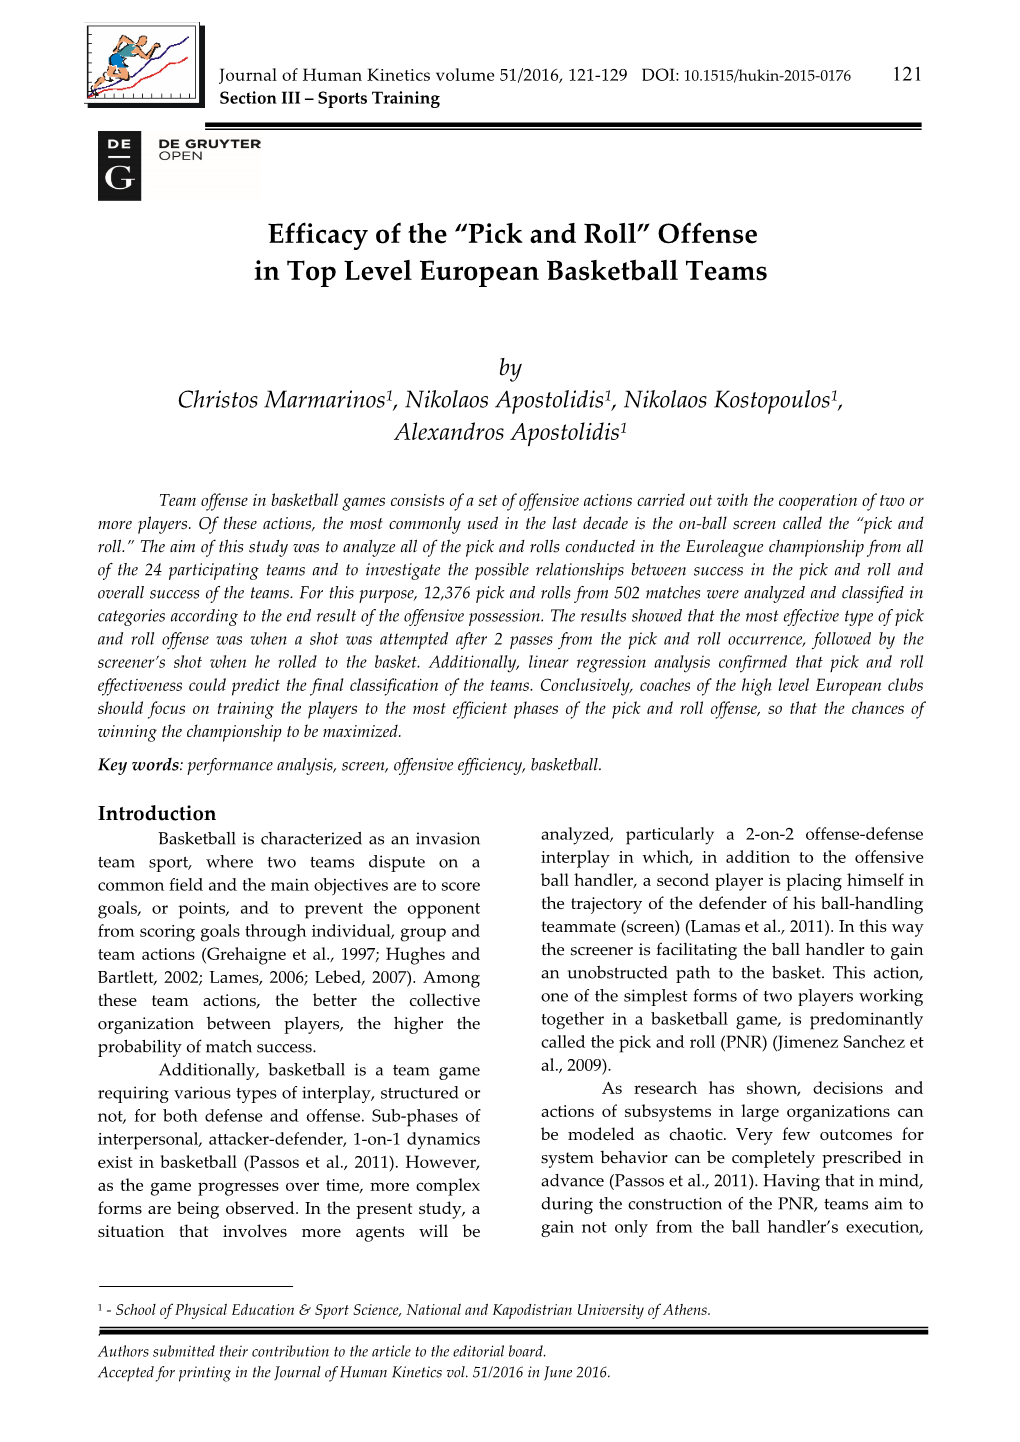 Efficacy of the “Pick and Roll” Offense in Top Level European Basketball Teams